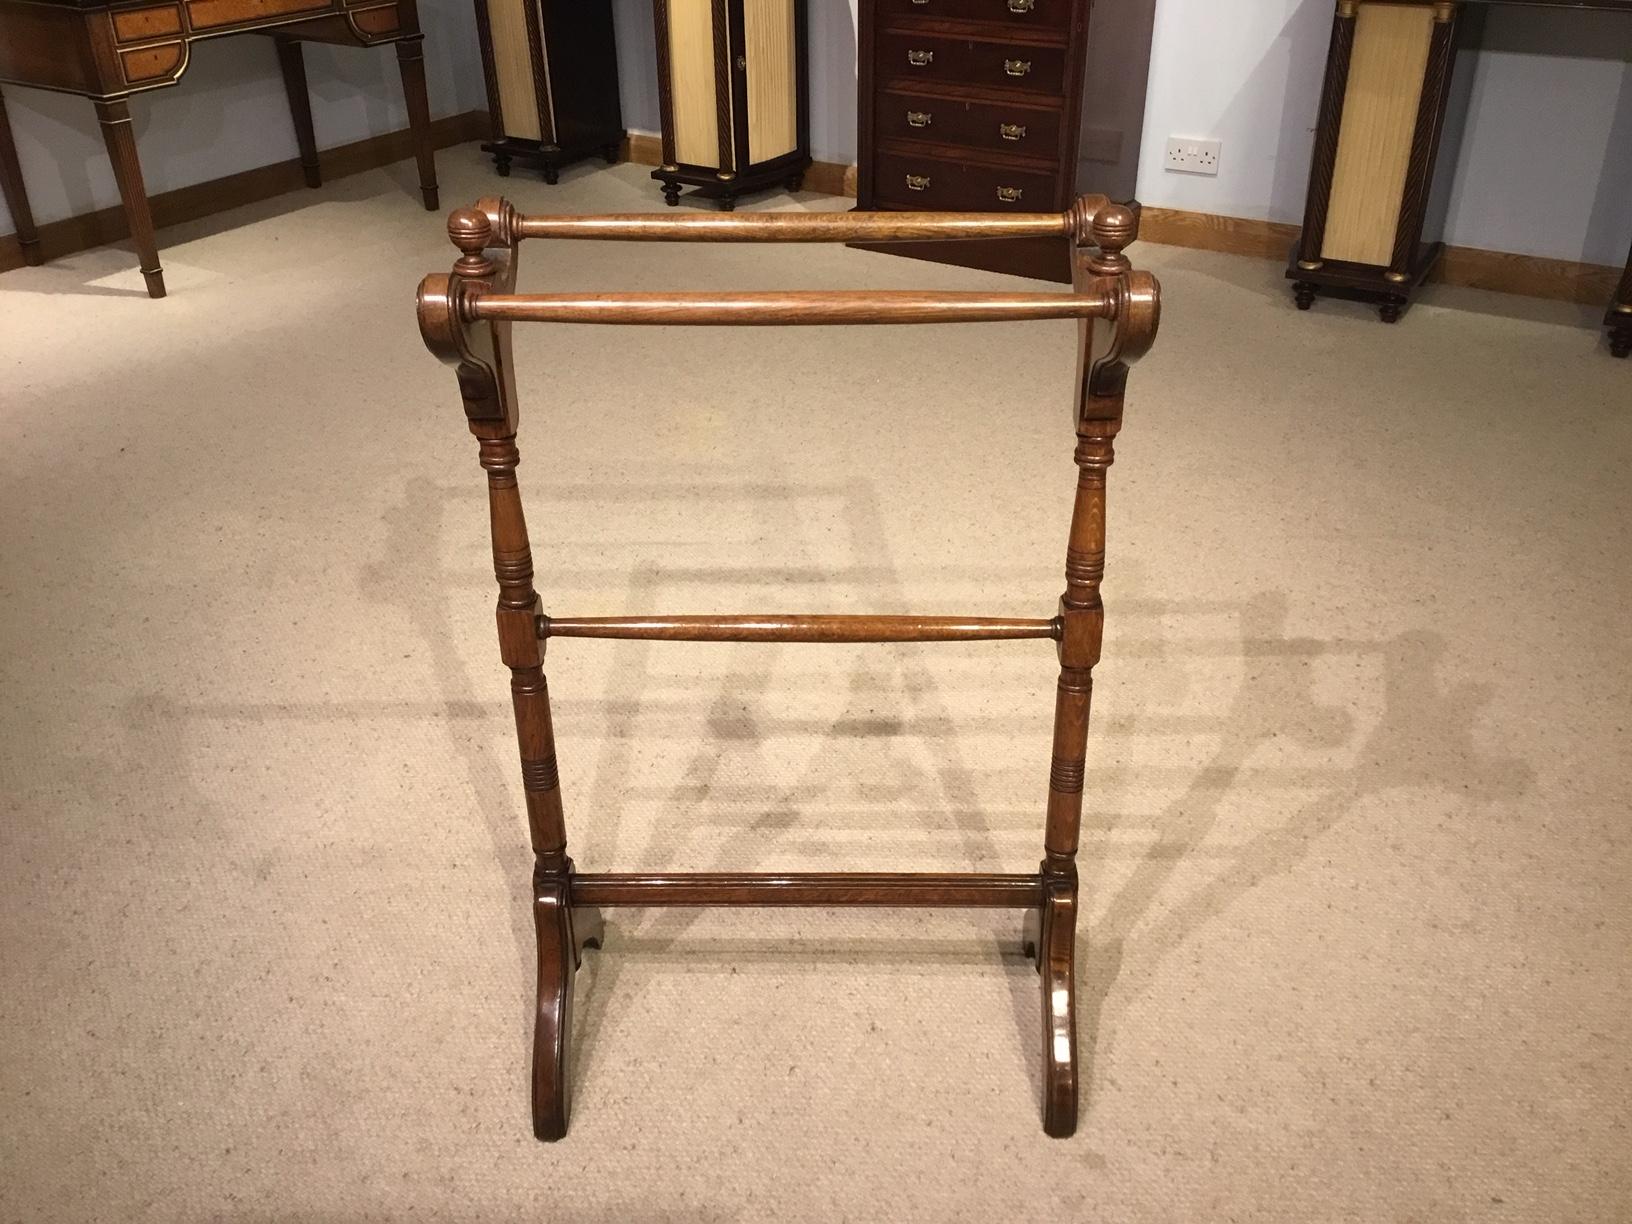 A fine quality oak late Victorian period antique towel rail. Each end with shaped supports with turned towel rails and standing on shaped feet, English, circa 1880-1900.

Dimensions: 22